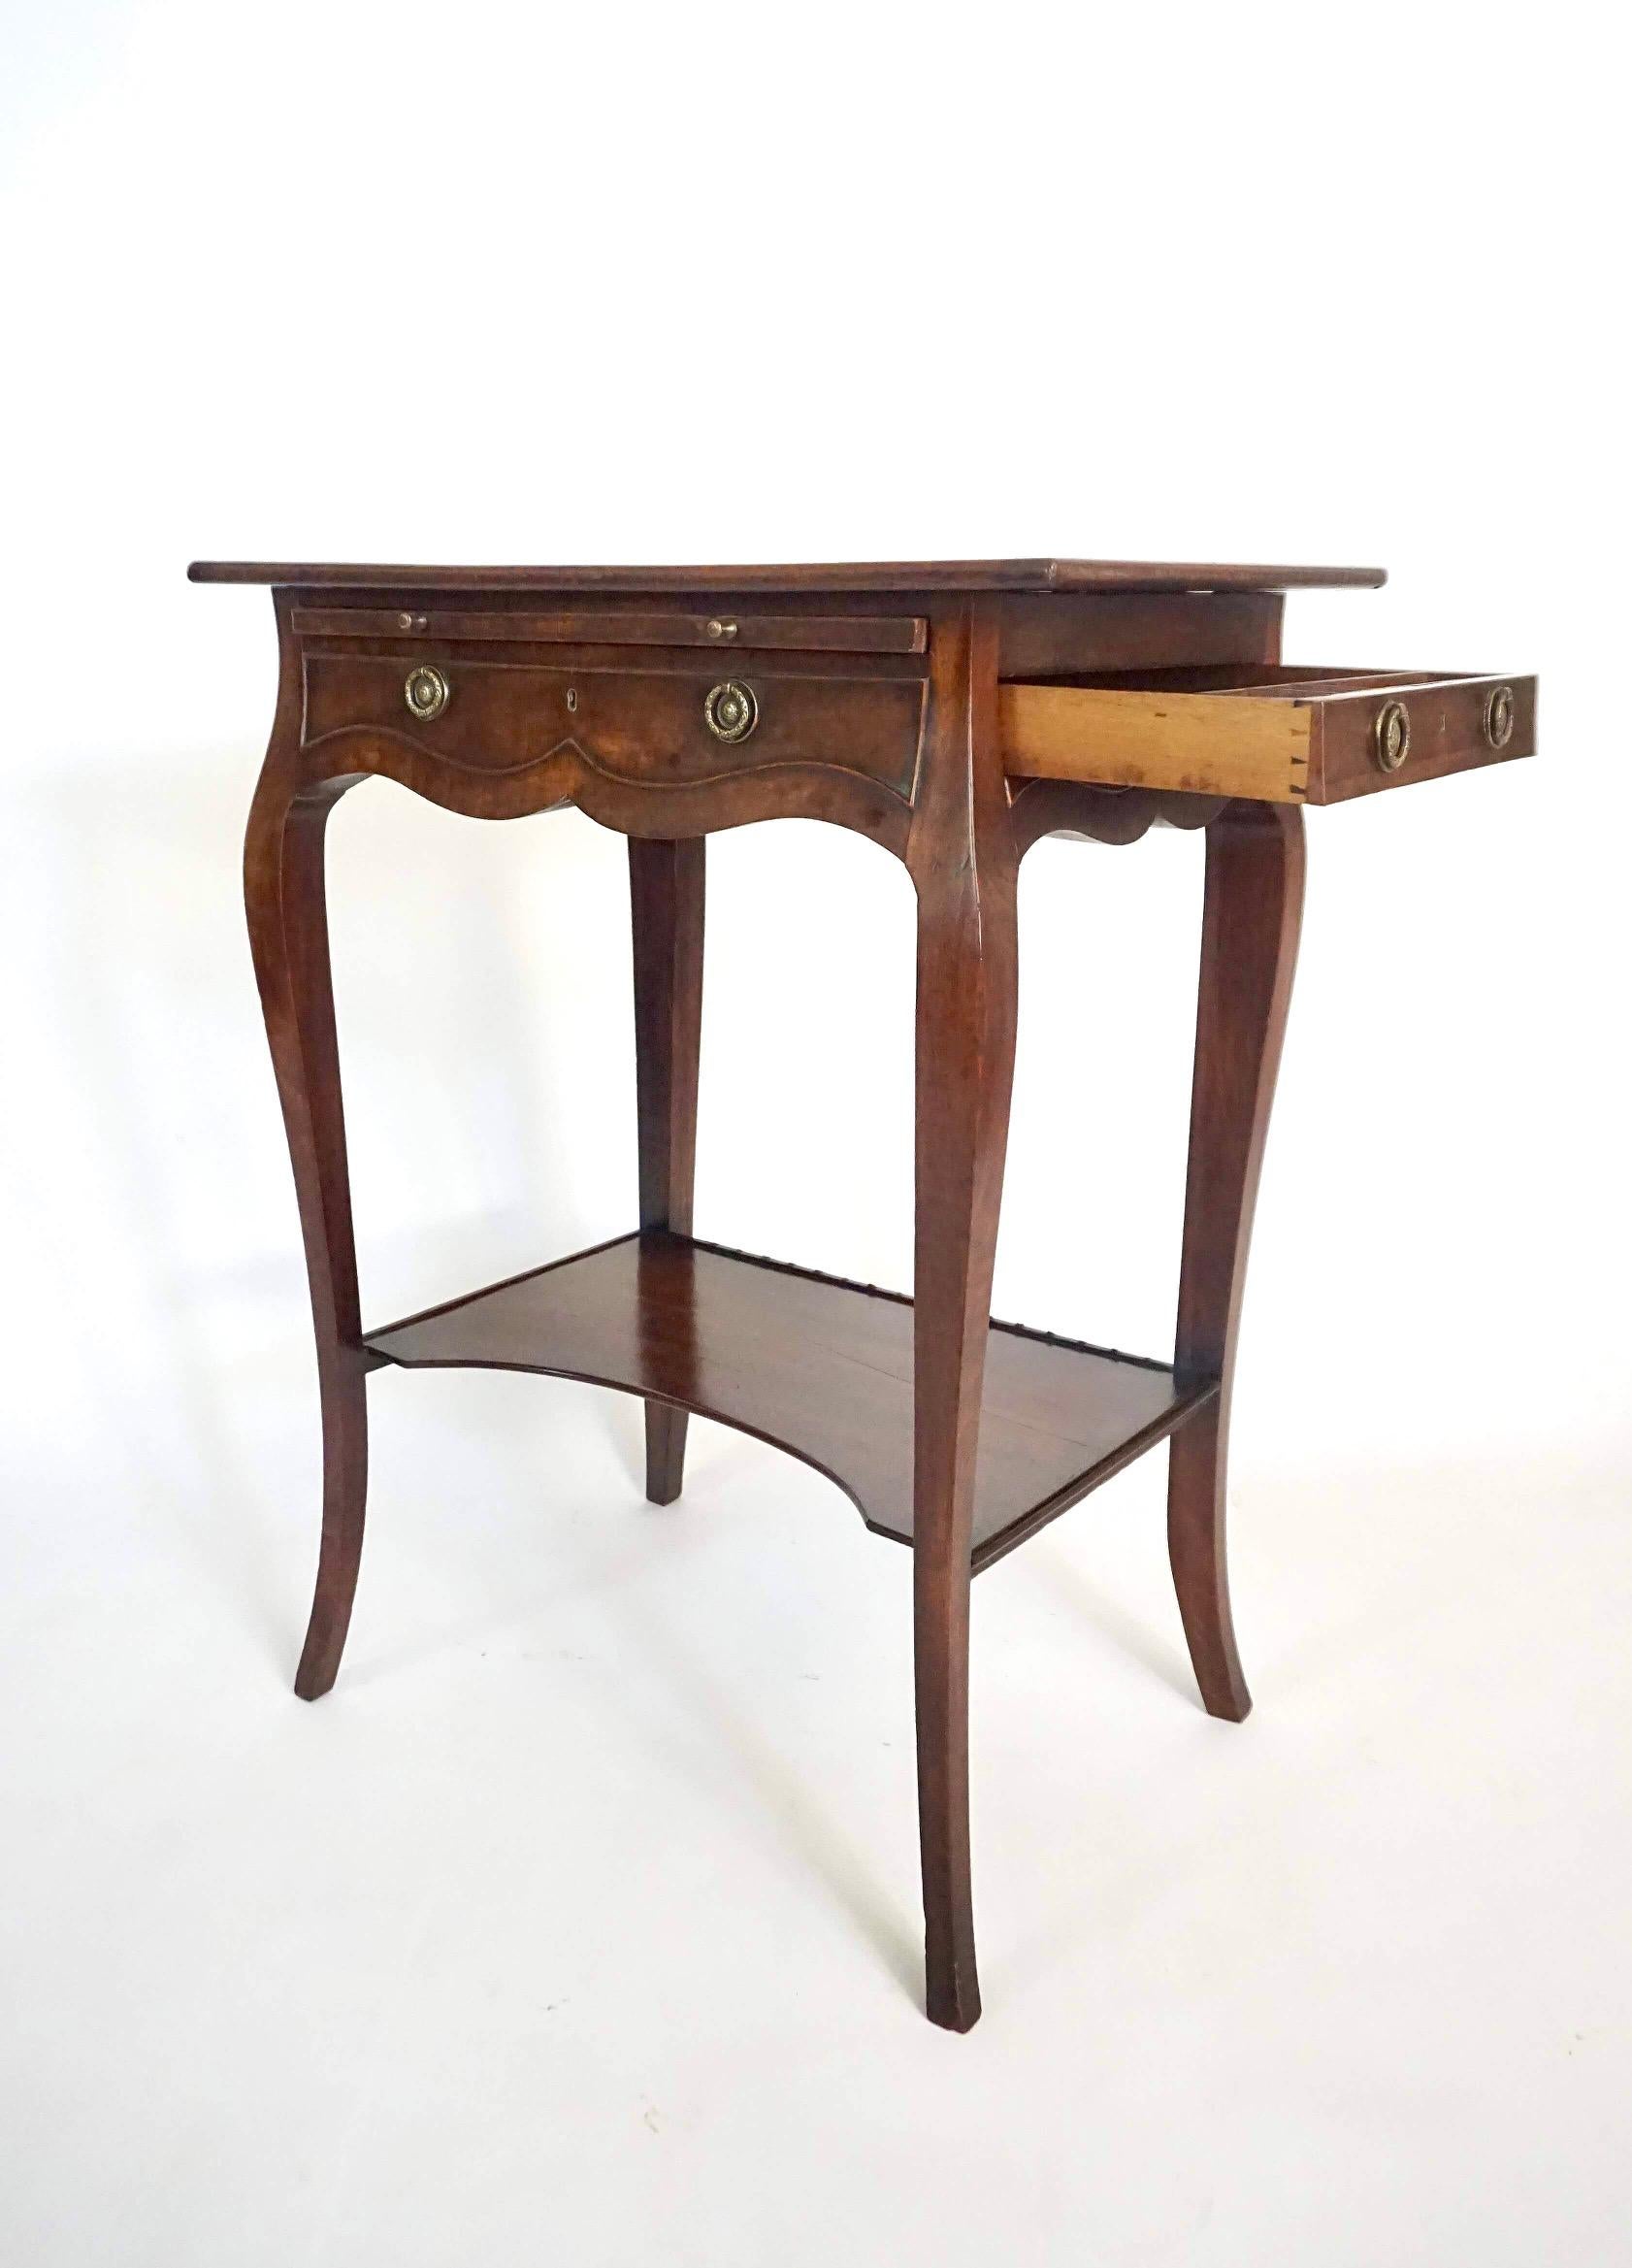 English George III Sabicu & Gonçalo Alves Work Table in the Manner of John Cobb For Sale 2